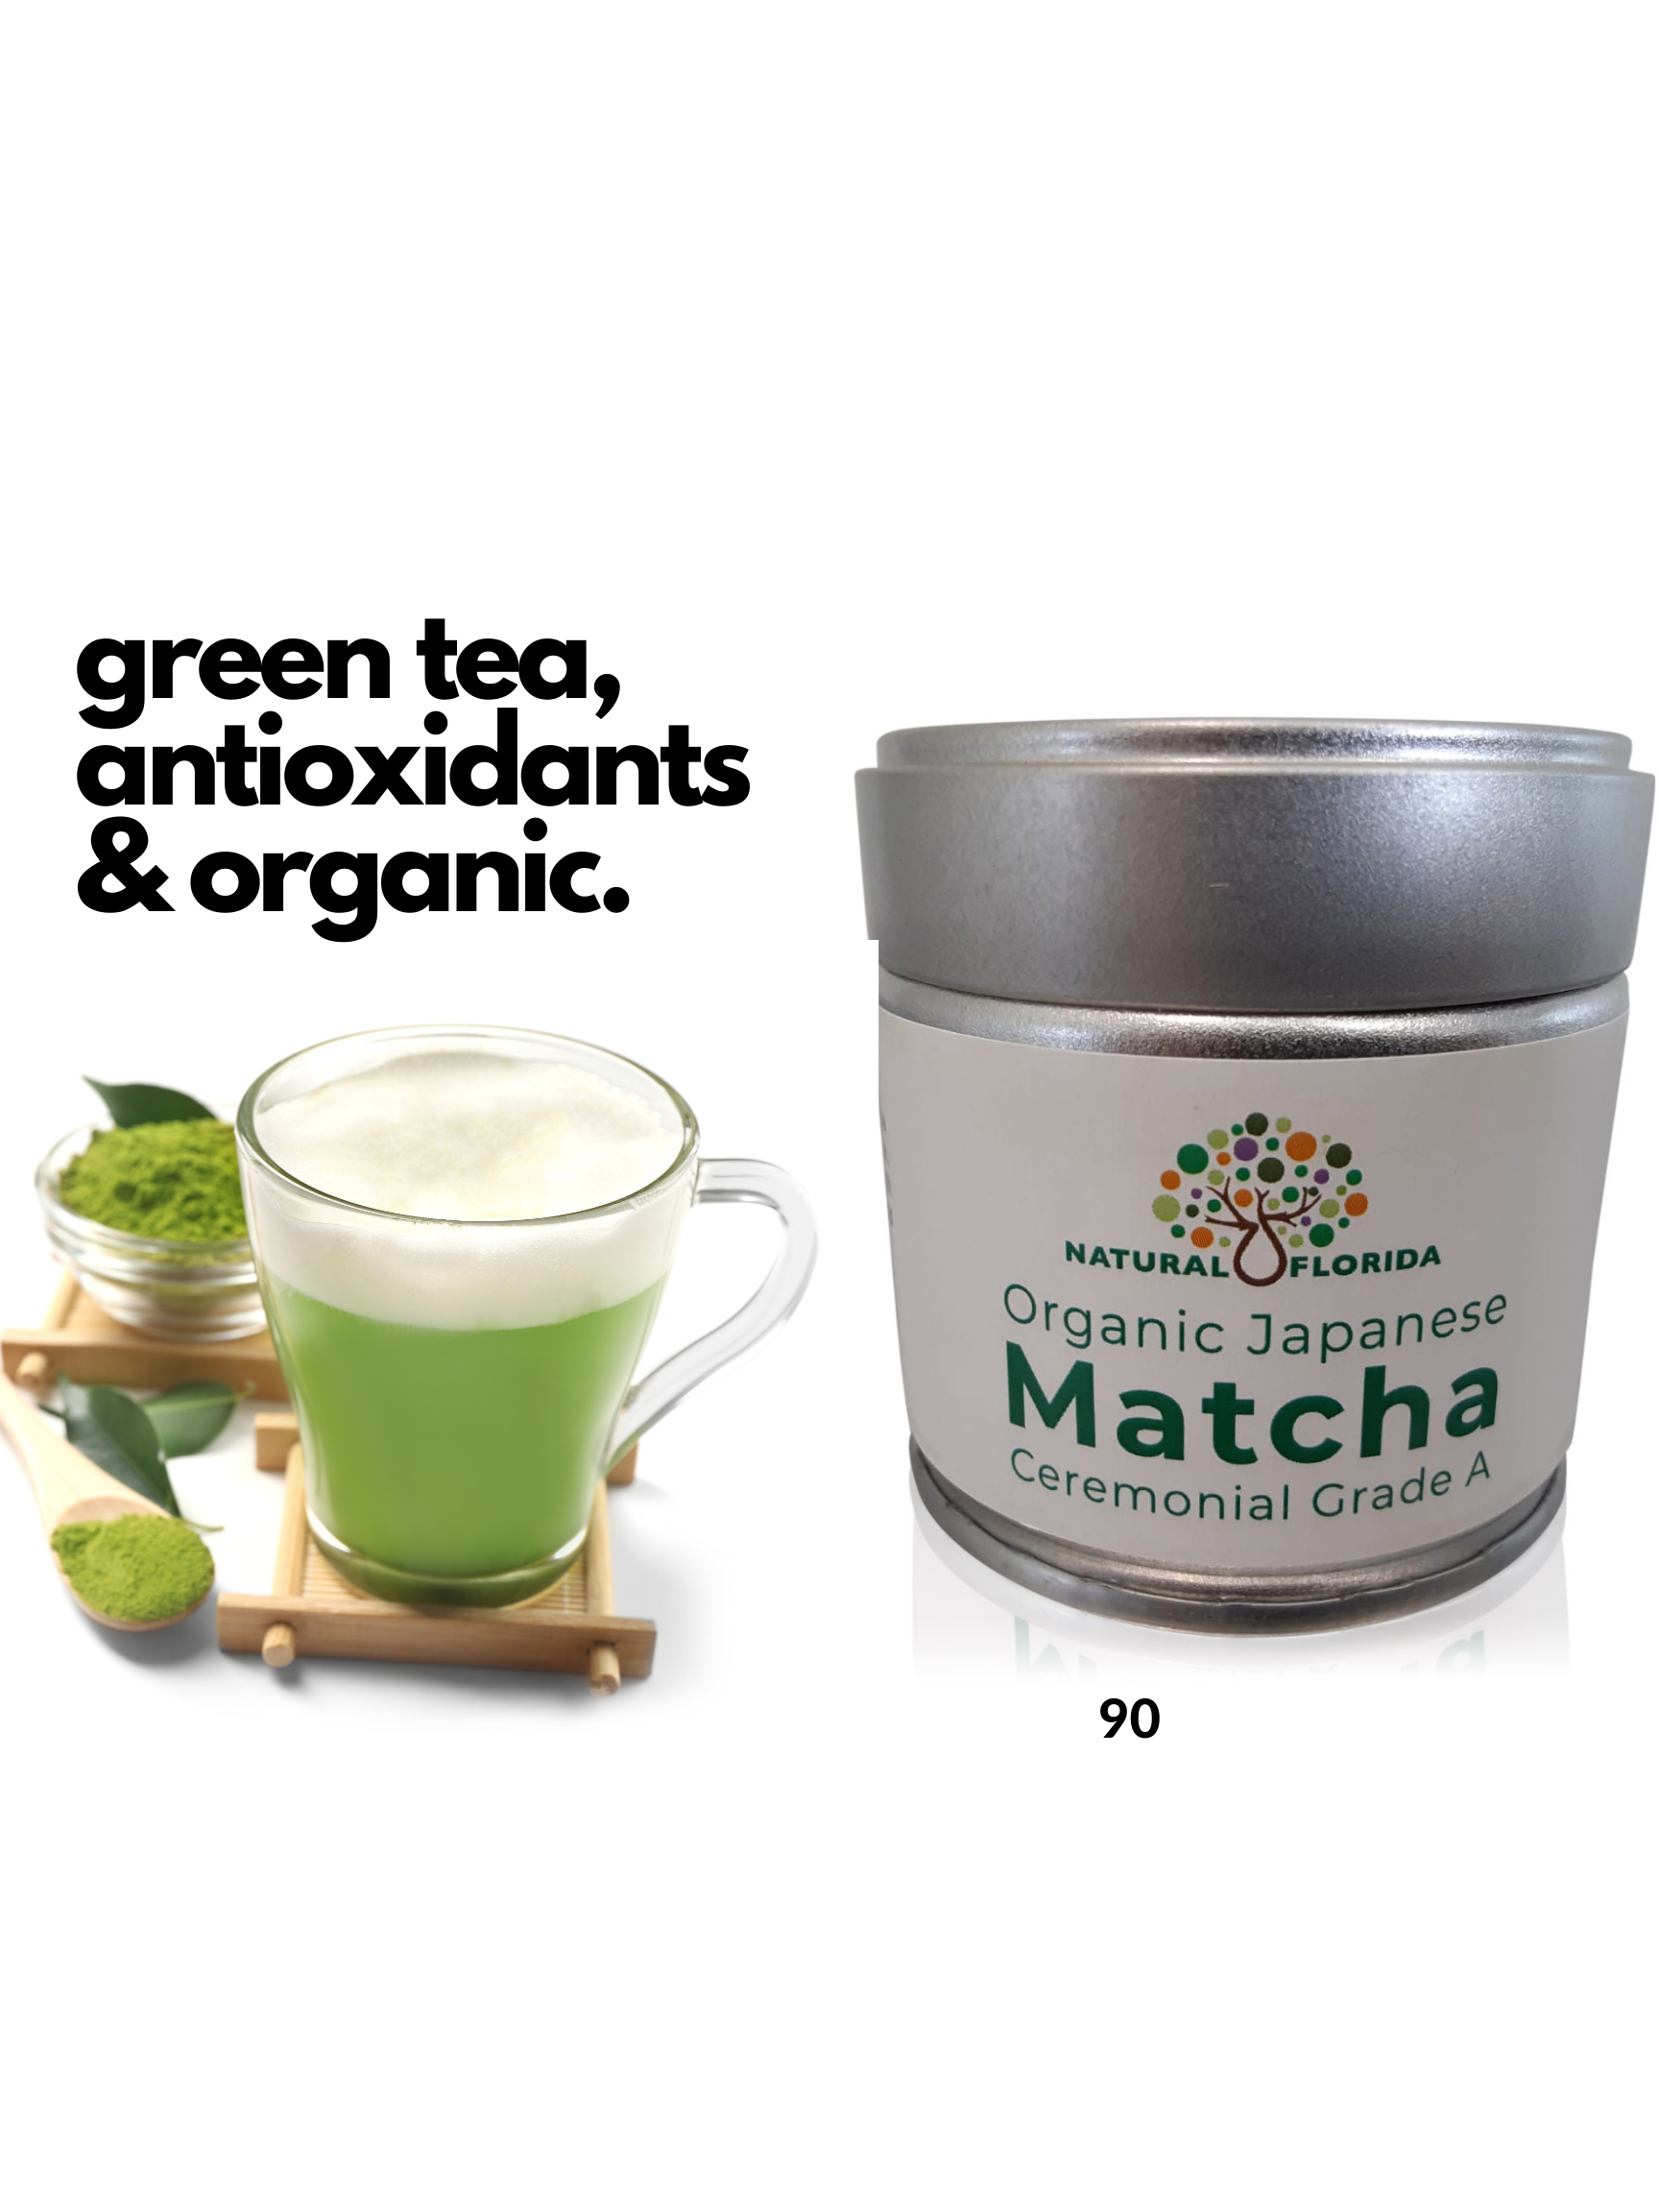 Matcha & CO - Matcha tea and supplements from Japan